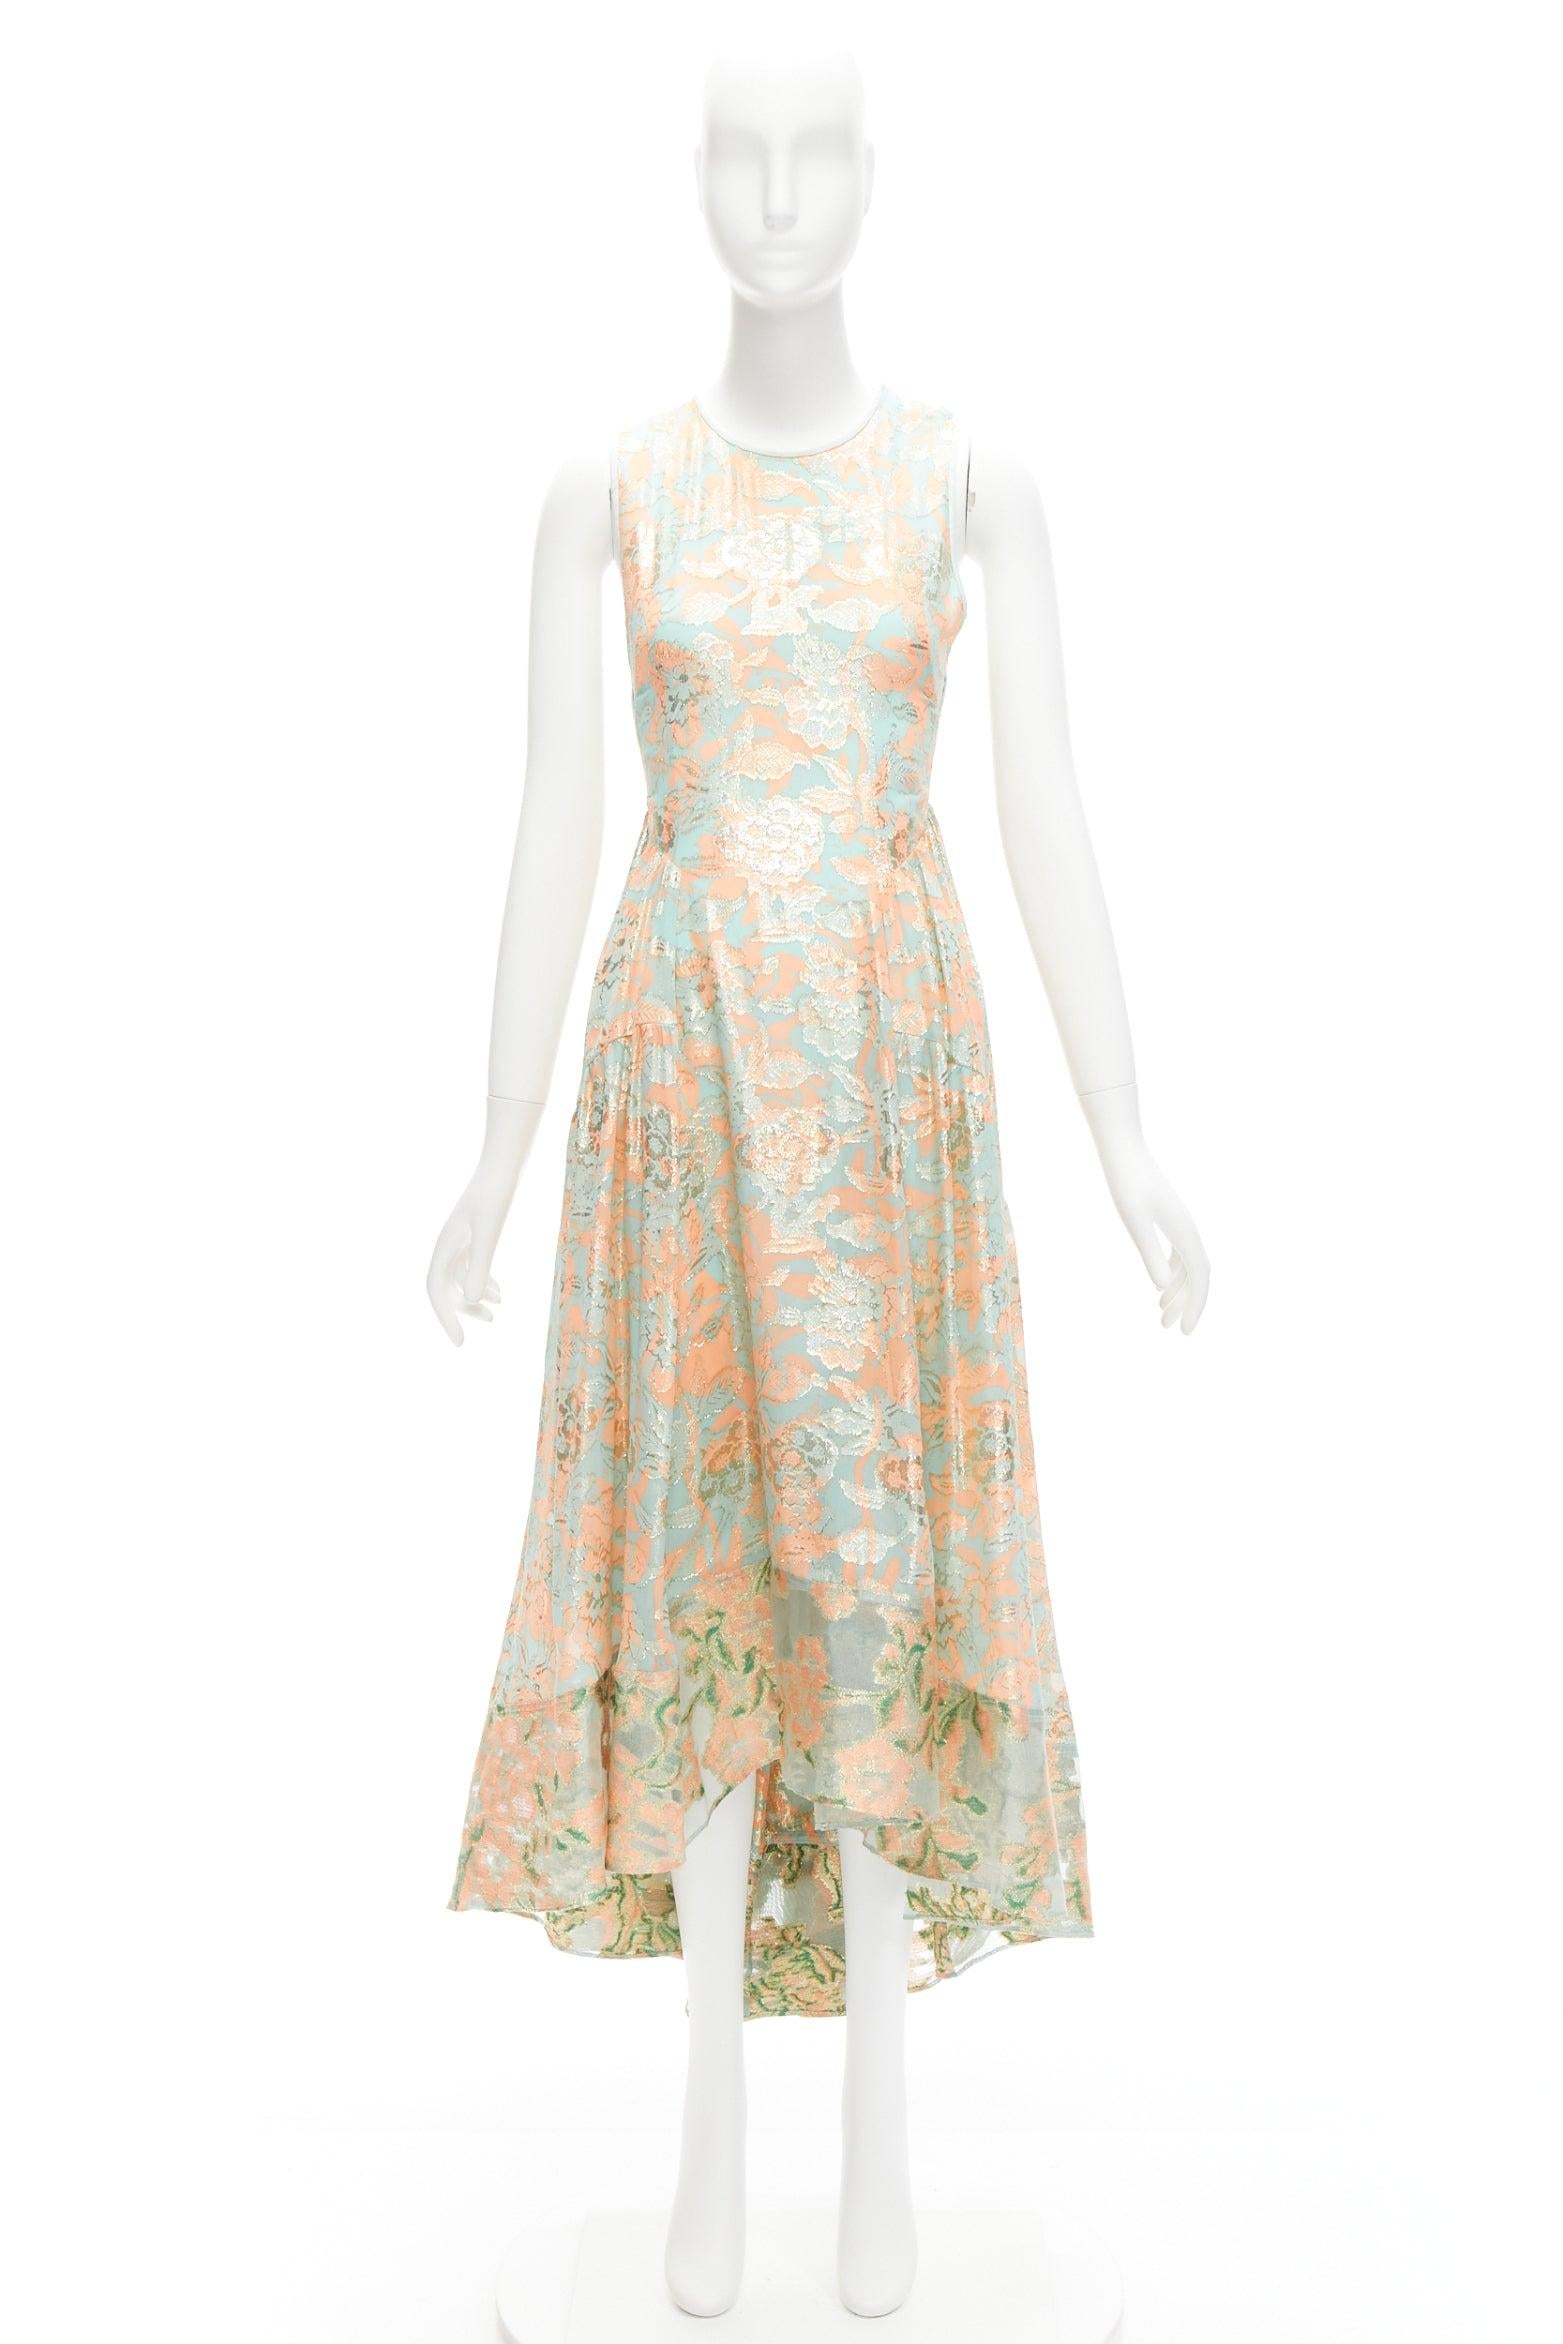 TORY BURCH 2016 Runway green pink metallic silk floral lace brocade dress US2 S For Sale 4